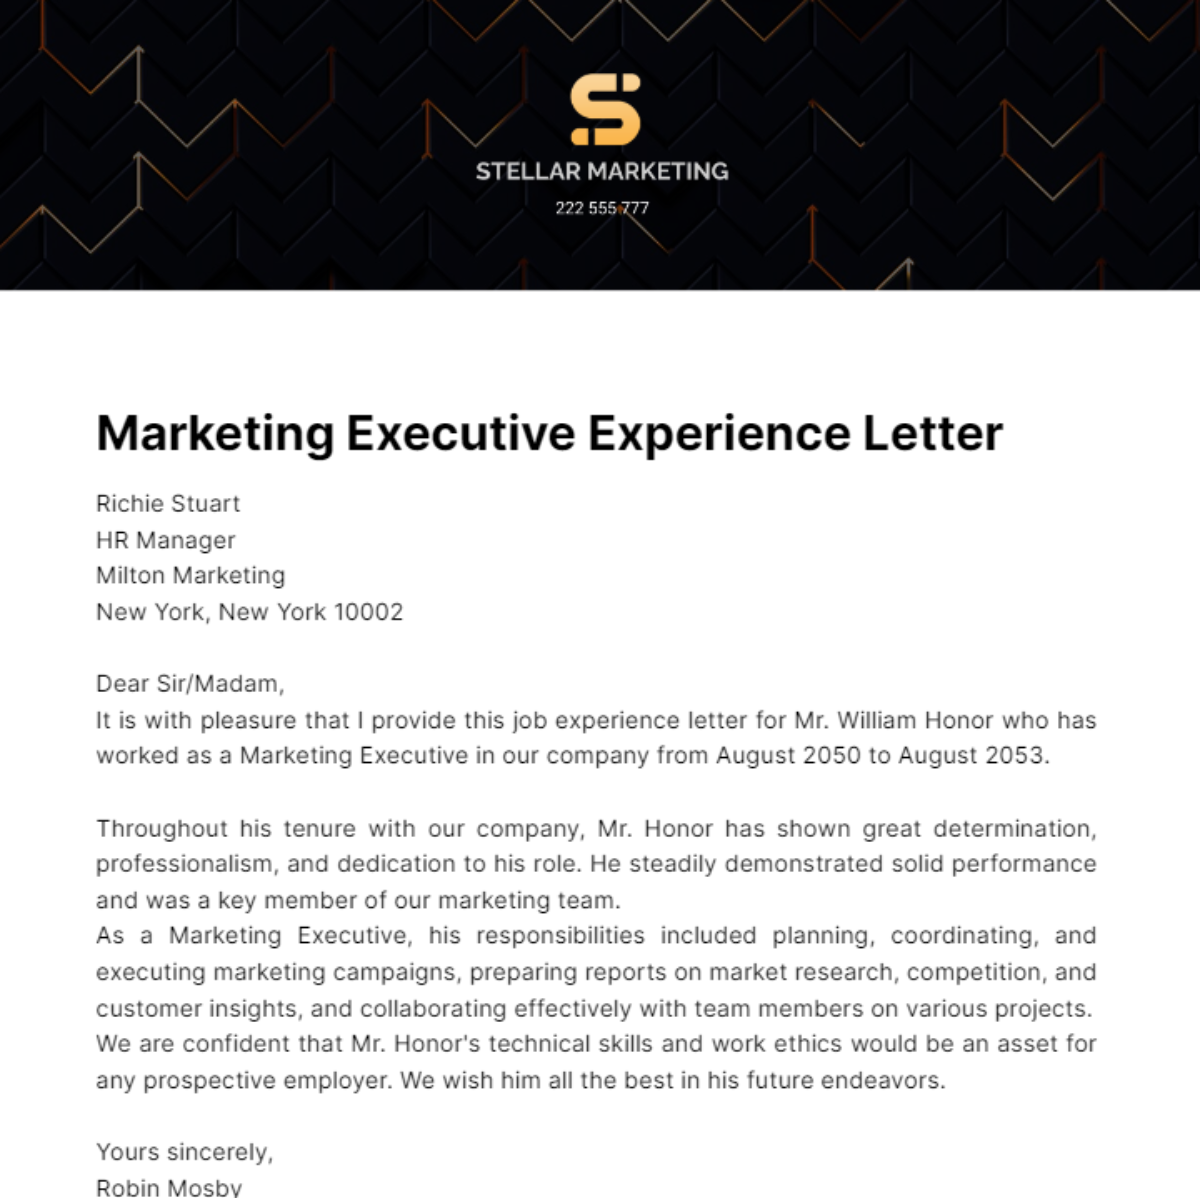 Marketing Executive Experience Letter Template